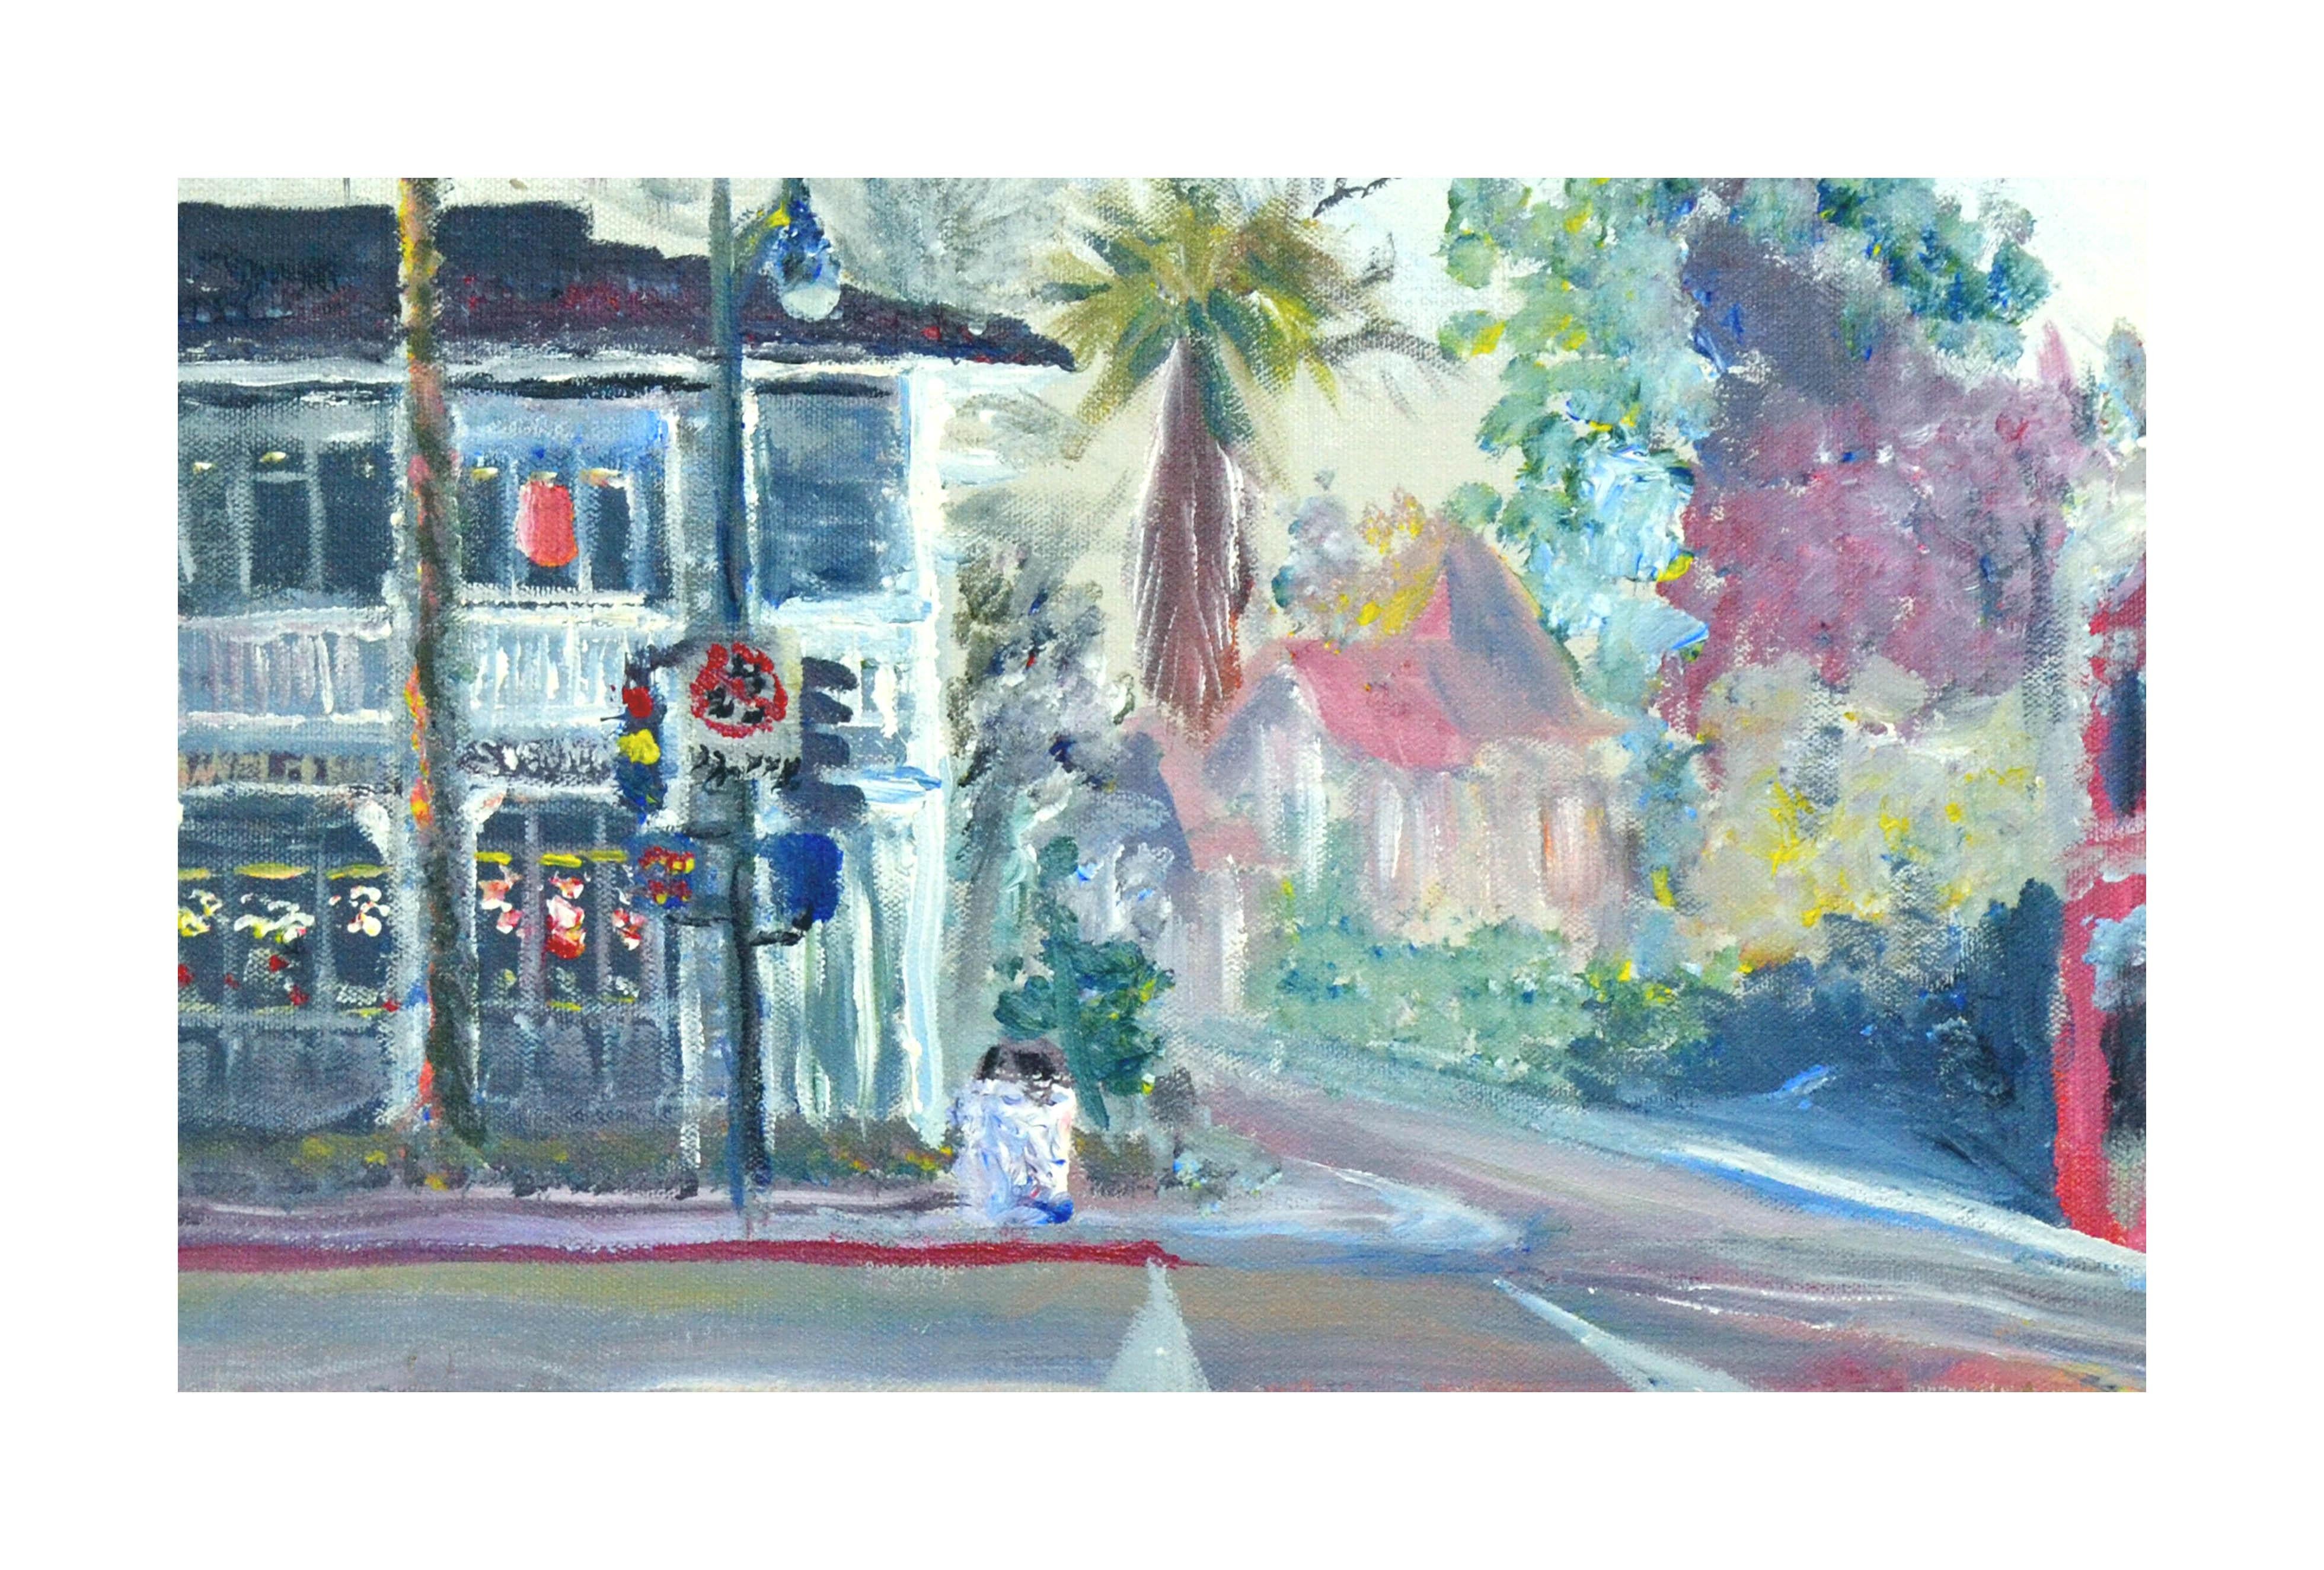 1980s Downtown Los Gatos, California Street Scene - Painting by Eugene Atchinson